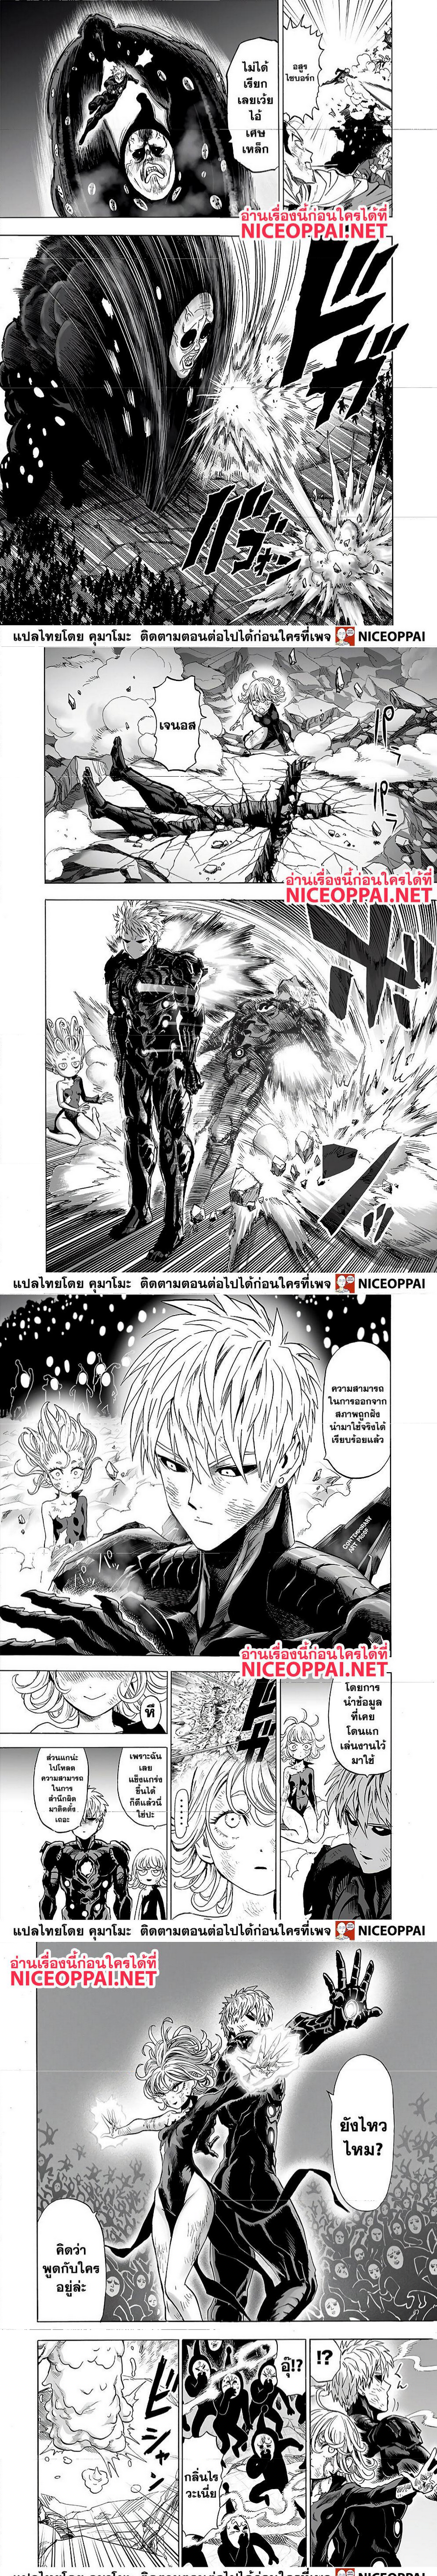 One Punch Man147 (4)